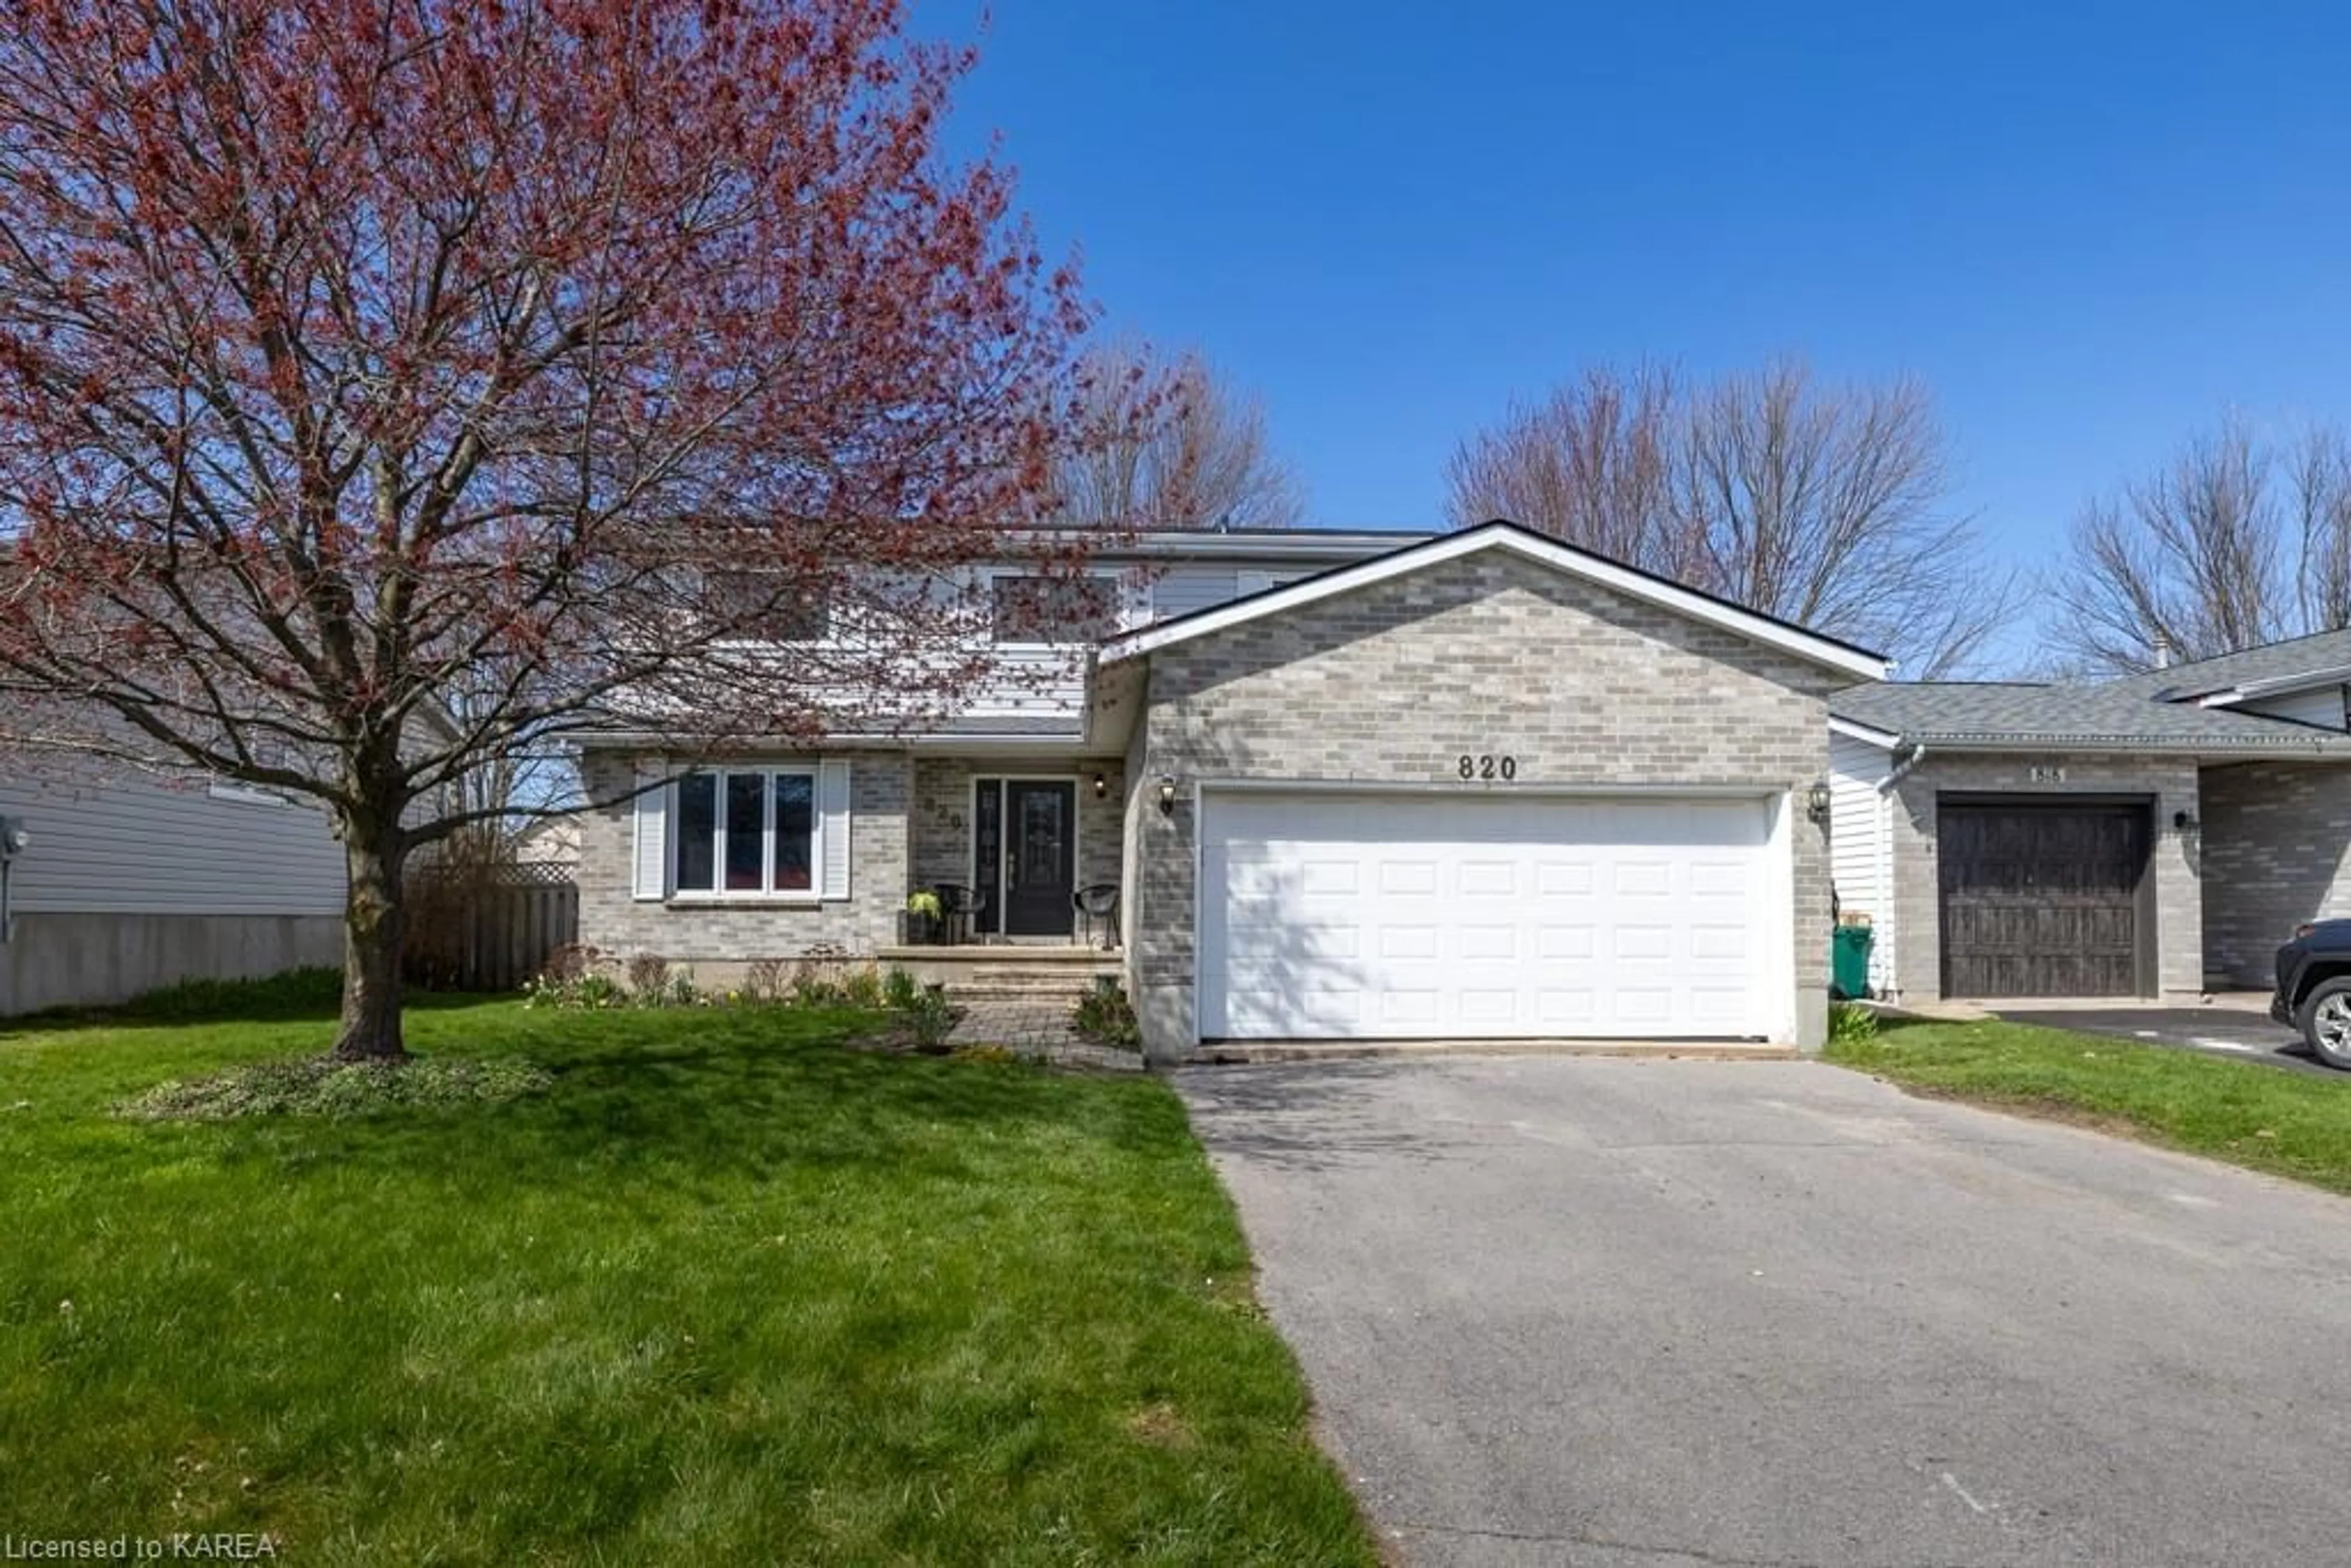 Frontside or backside of a home for 820 Cataraqui Woods Dr, Kingston Ontario K7P 2P9